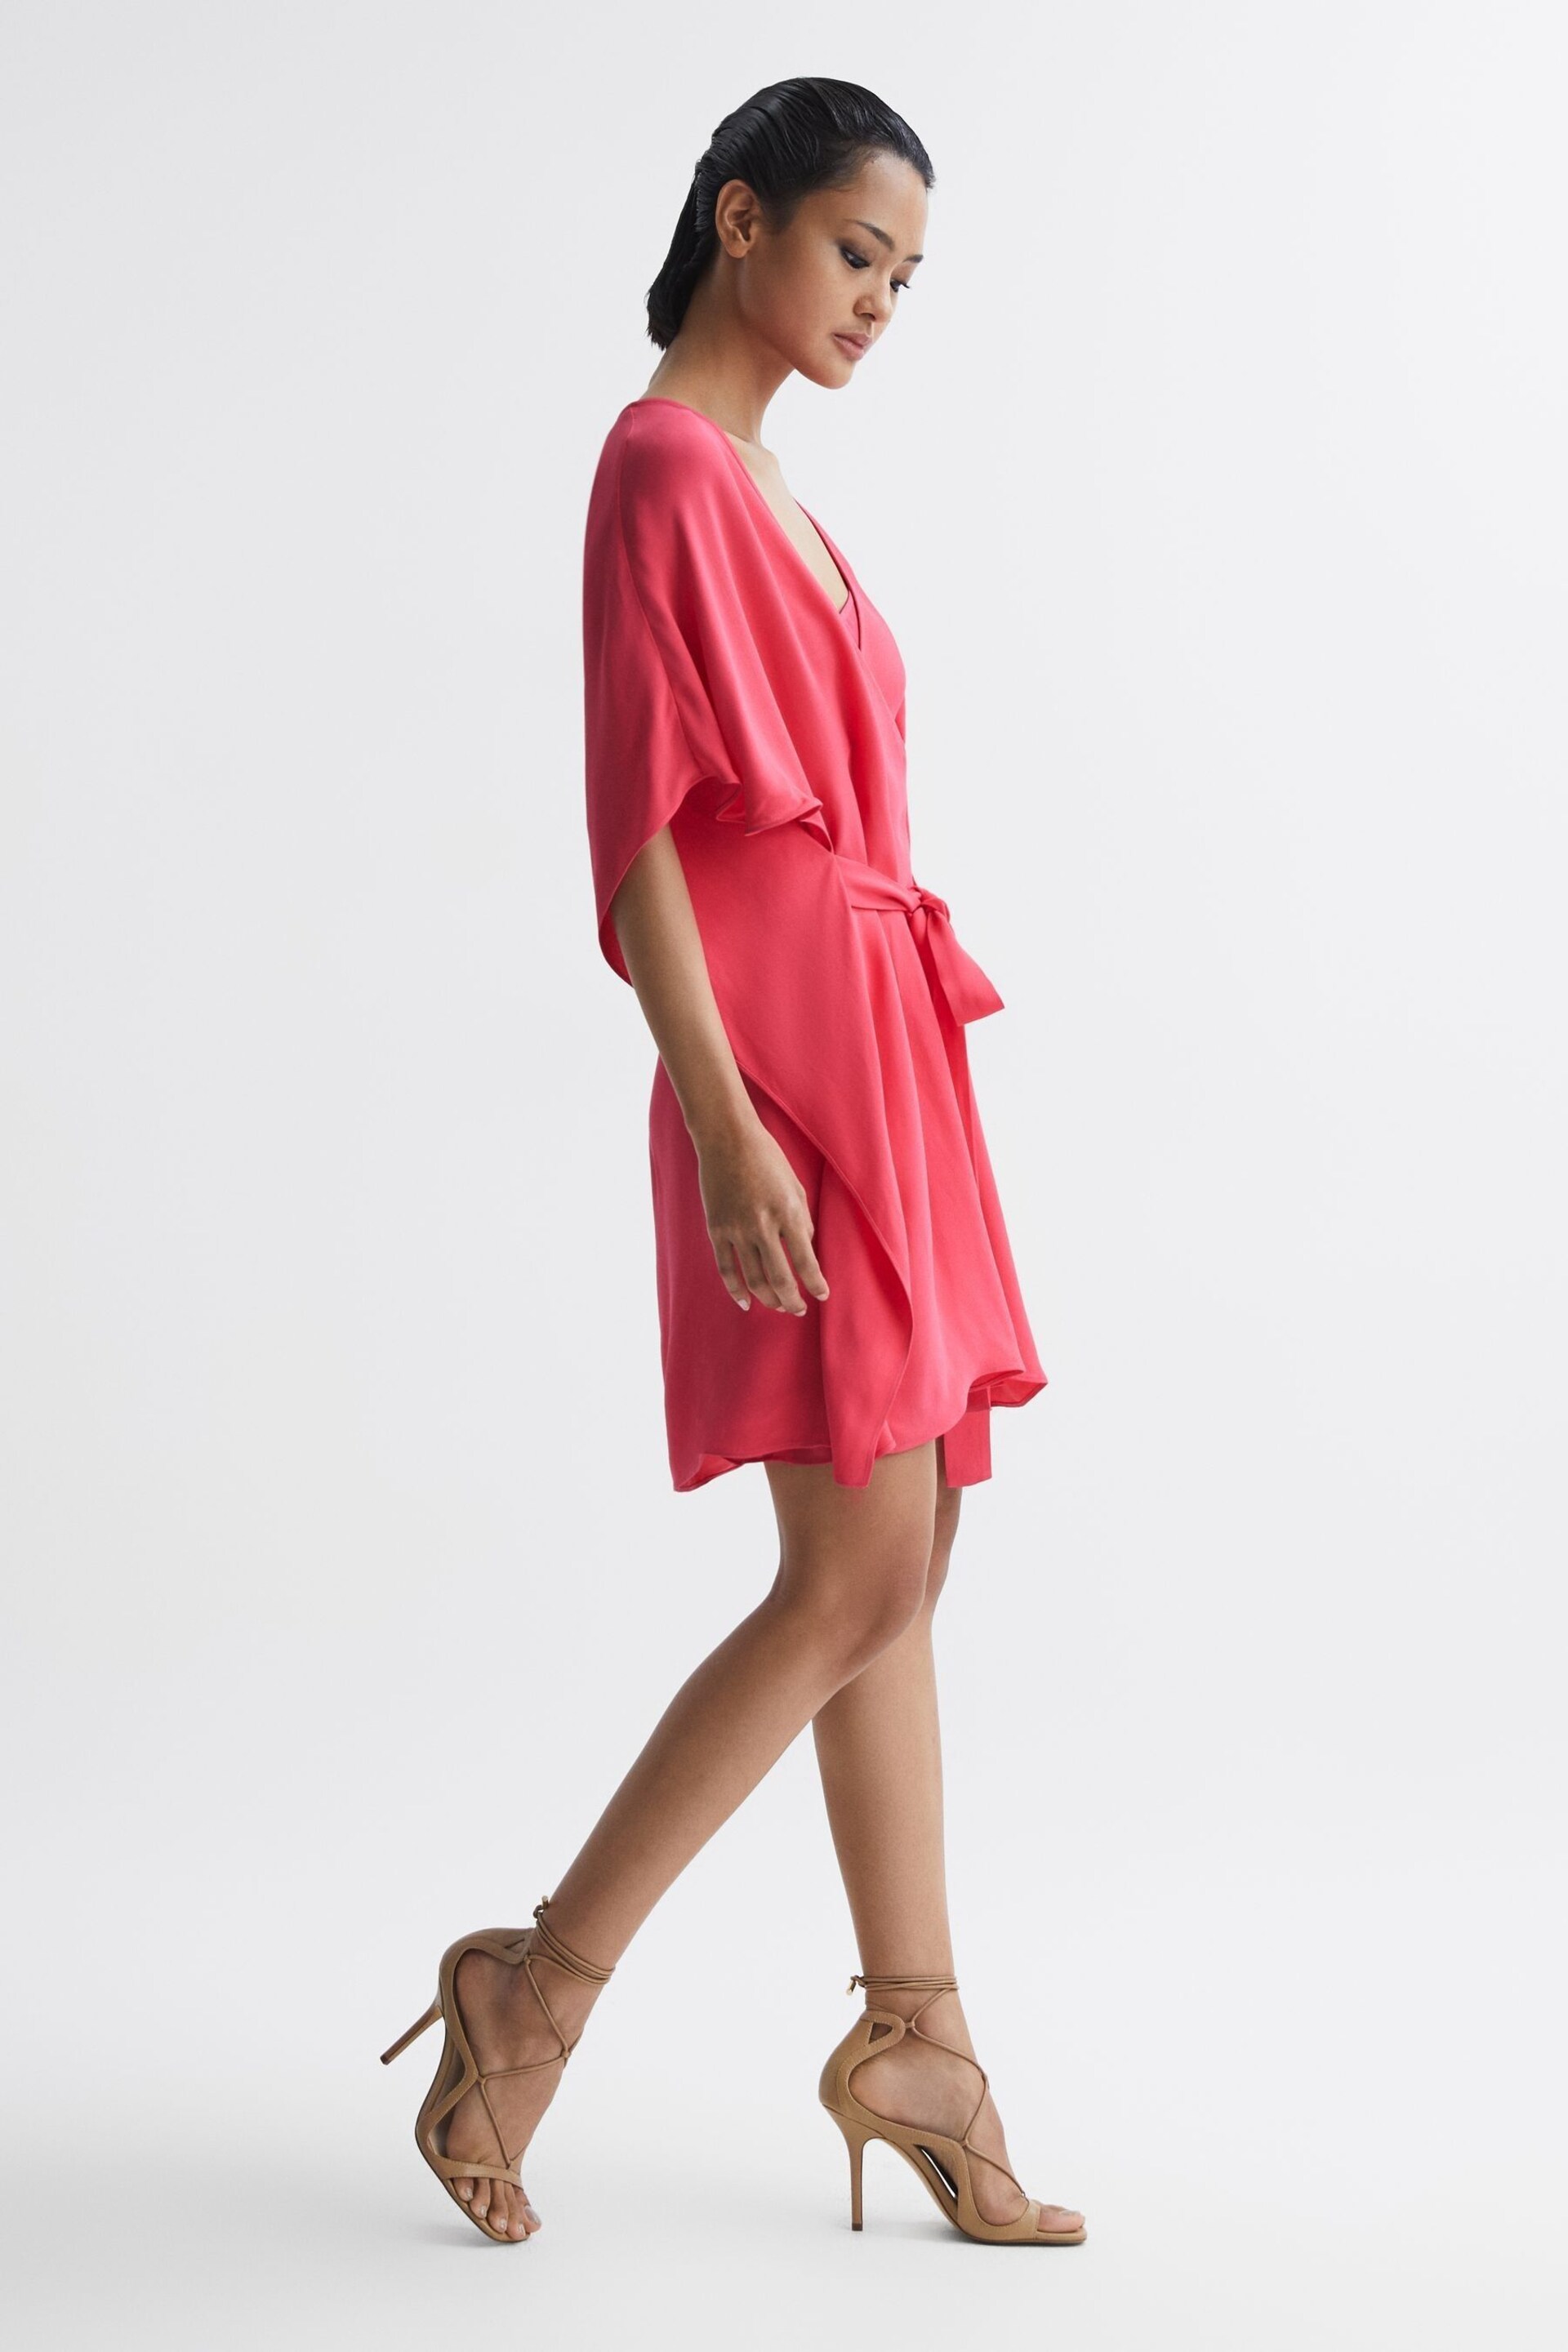 Reiss Pink Peony Relaxed Fit Wrap Mini Dress - Image 6 of 7